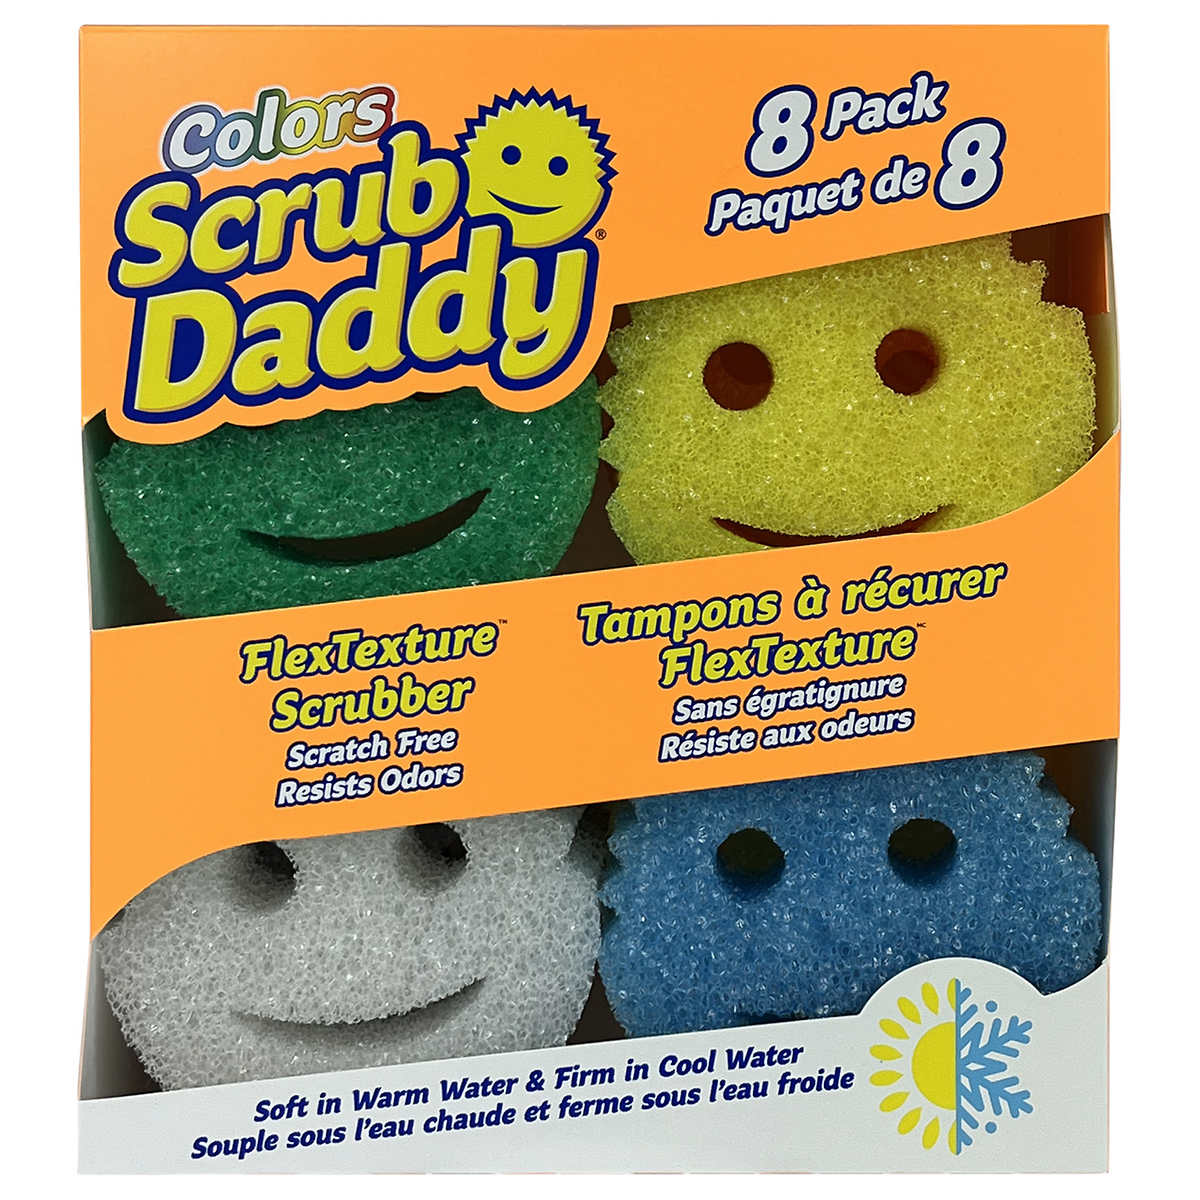 Scrub Daddy Colors Sponge Scratch free and Odor Resistant